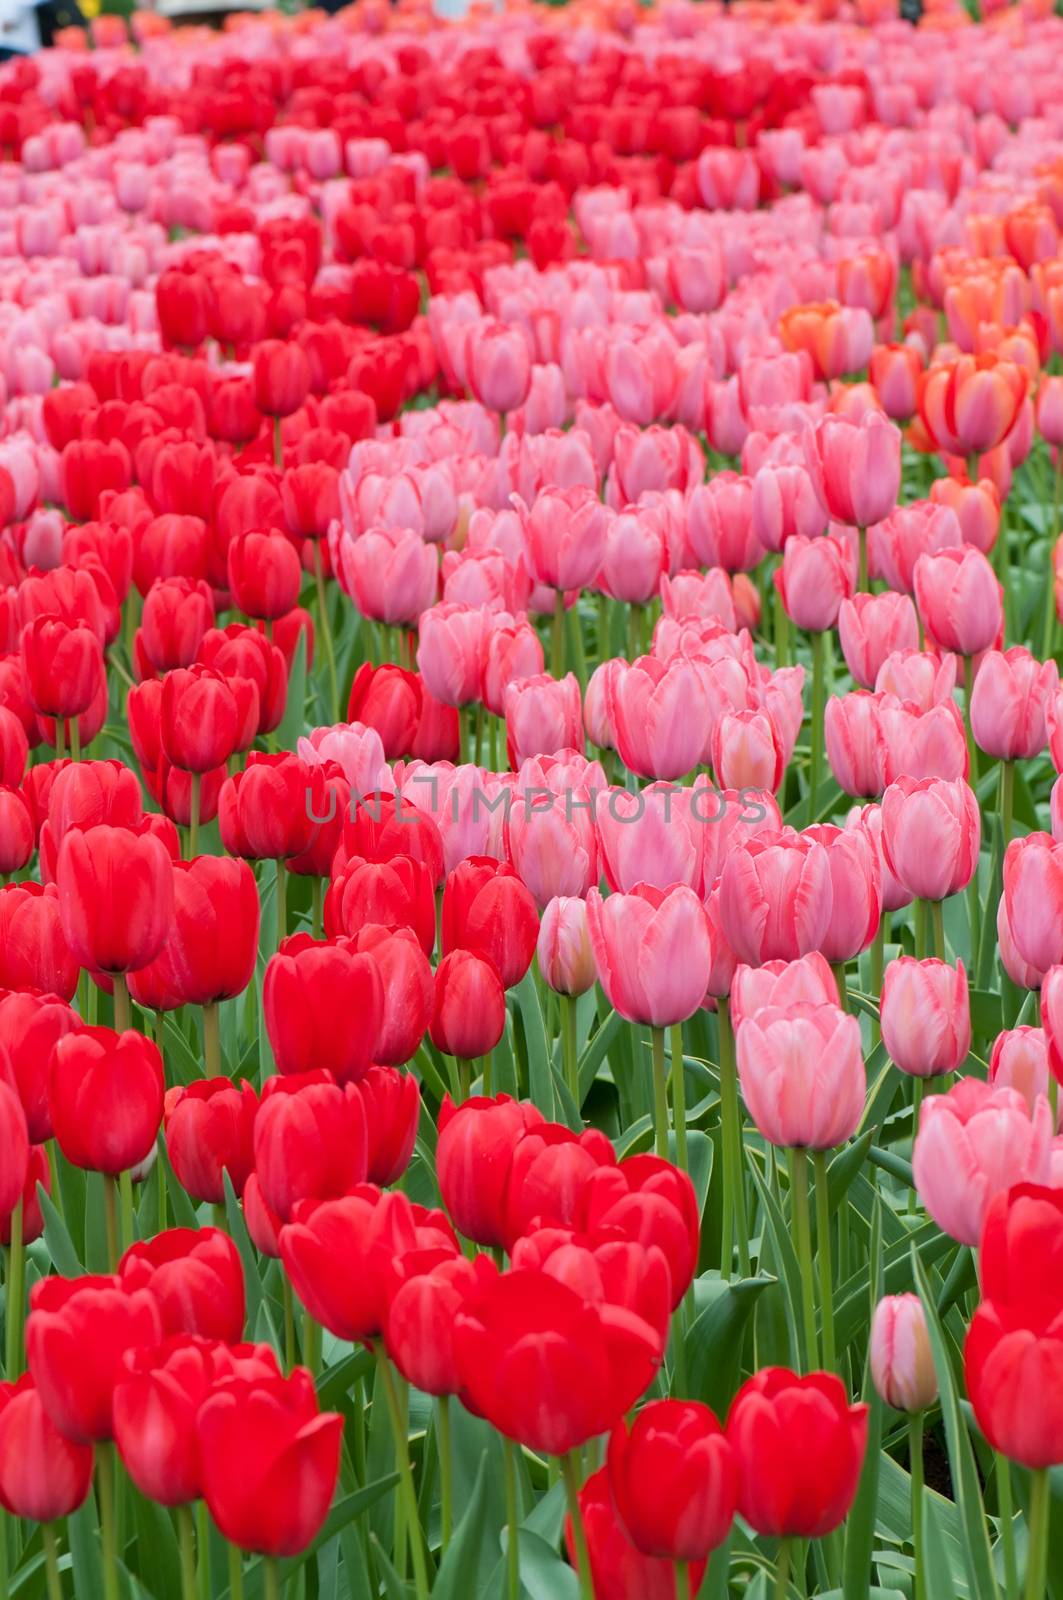 Flower beds of red and pink tulips, waves